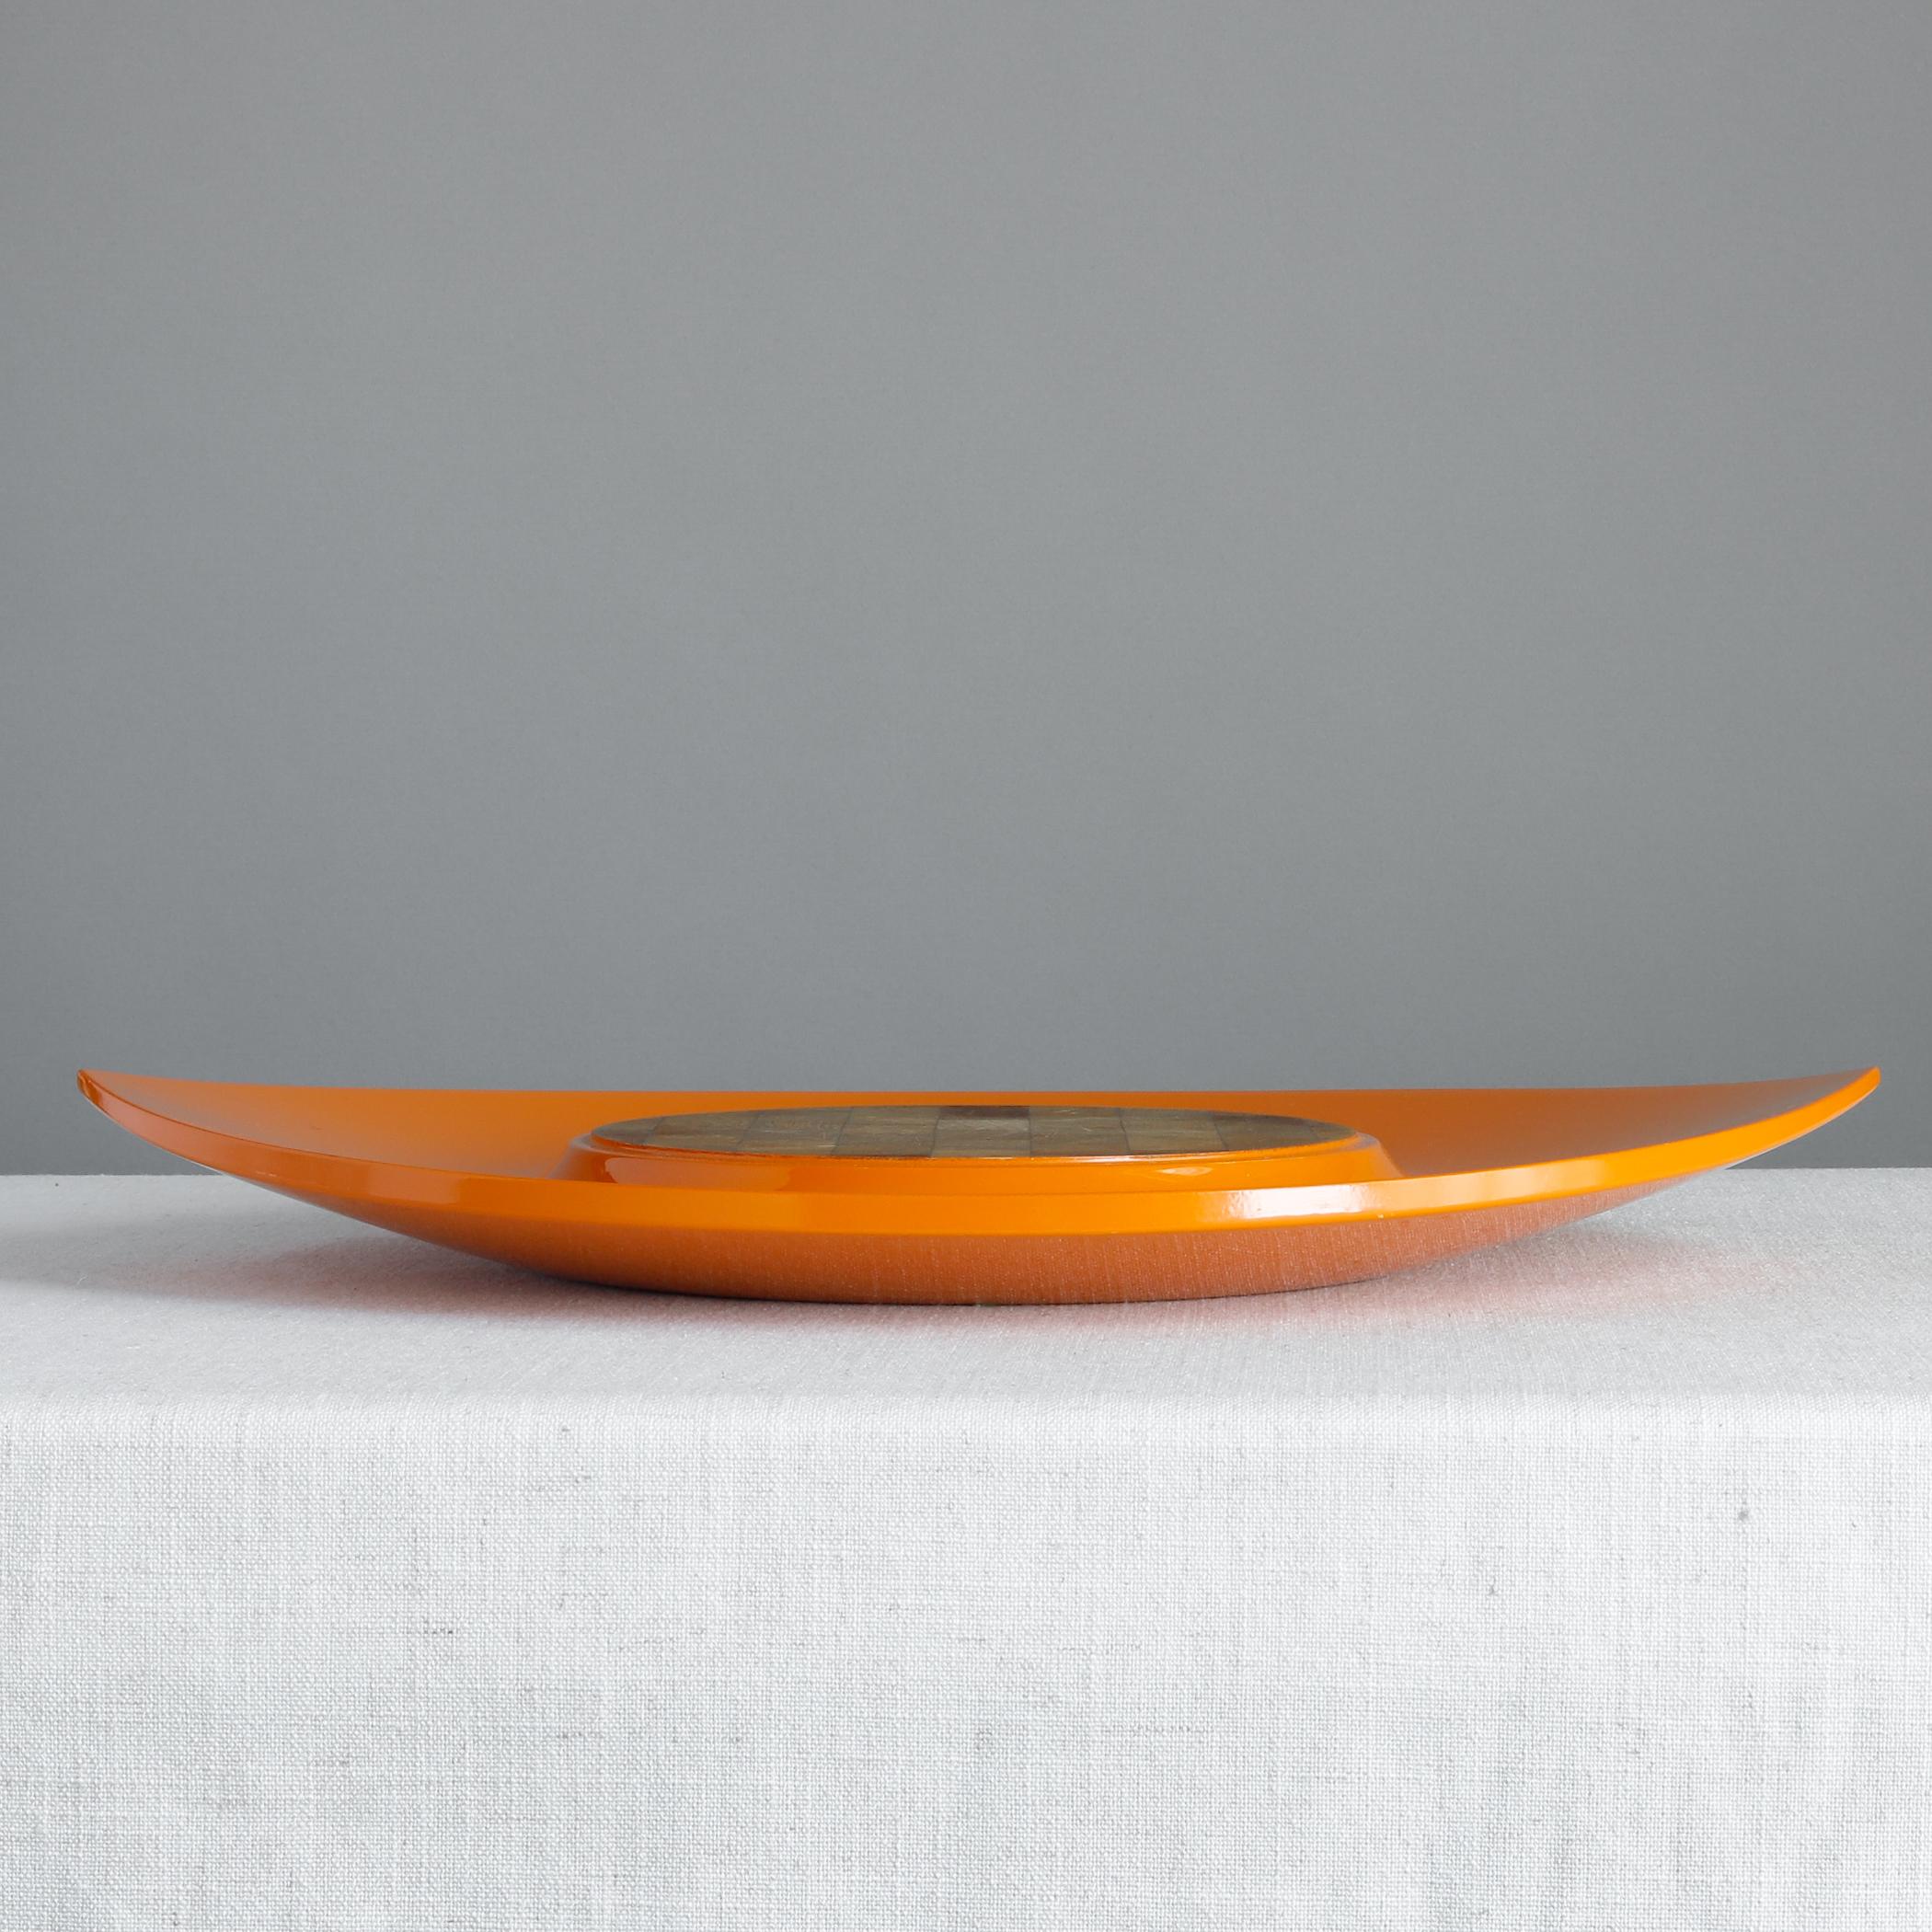 Orange lacquered wood 'Festivaal' serving tray designed by Jens Quistgaard for Dansk. Called an 'endwood tray' in Dansk catalogues, the center is made of teak and used for cutting cheese or other treats--crackers can go around the perimeter. The